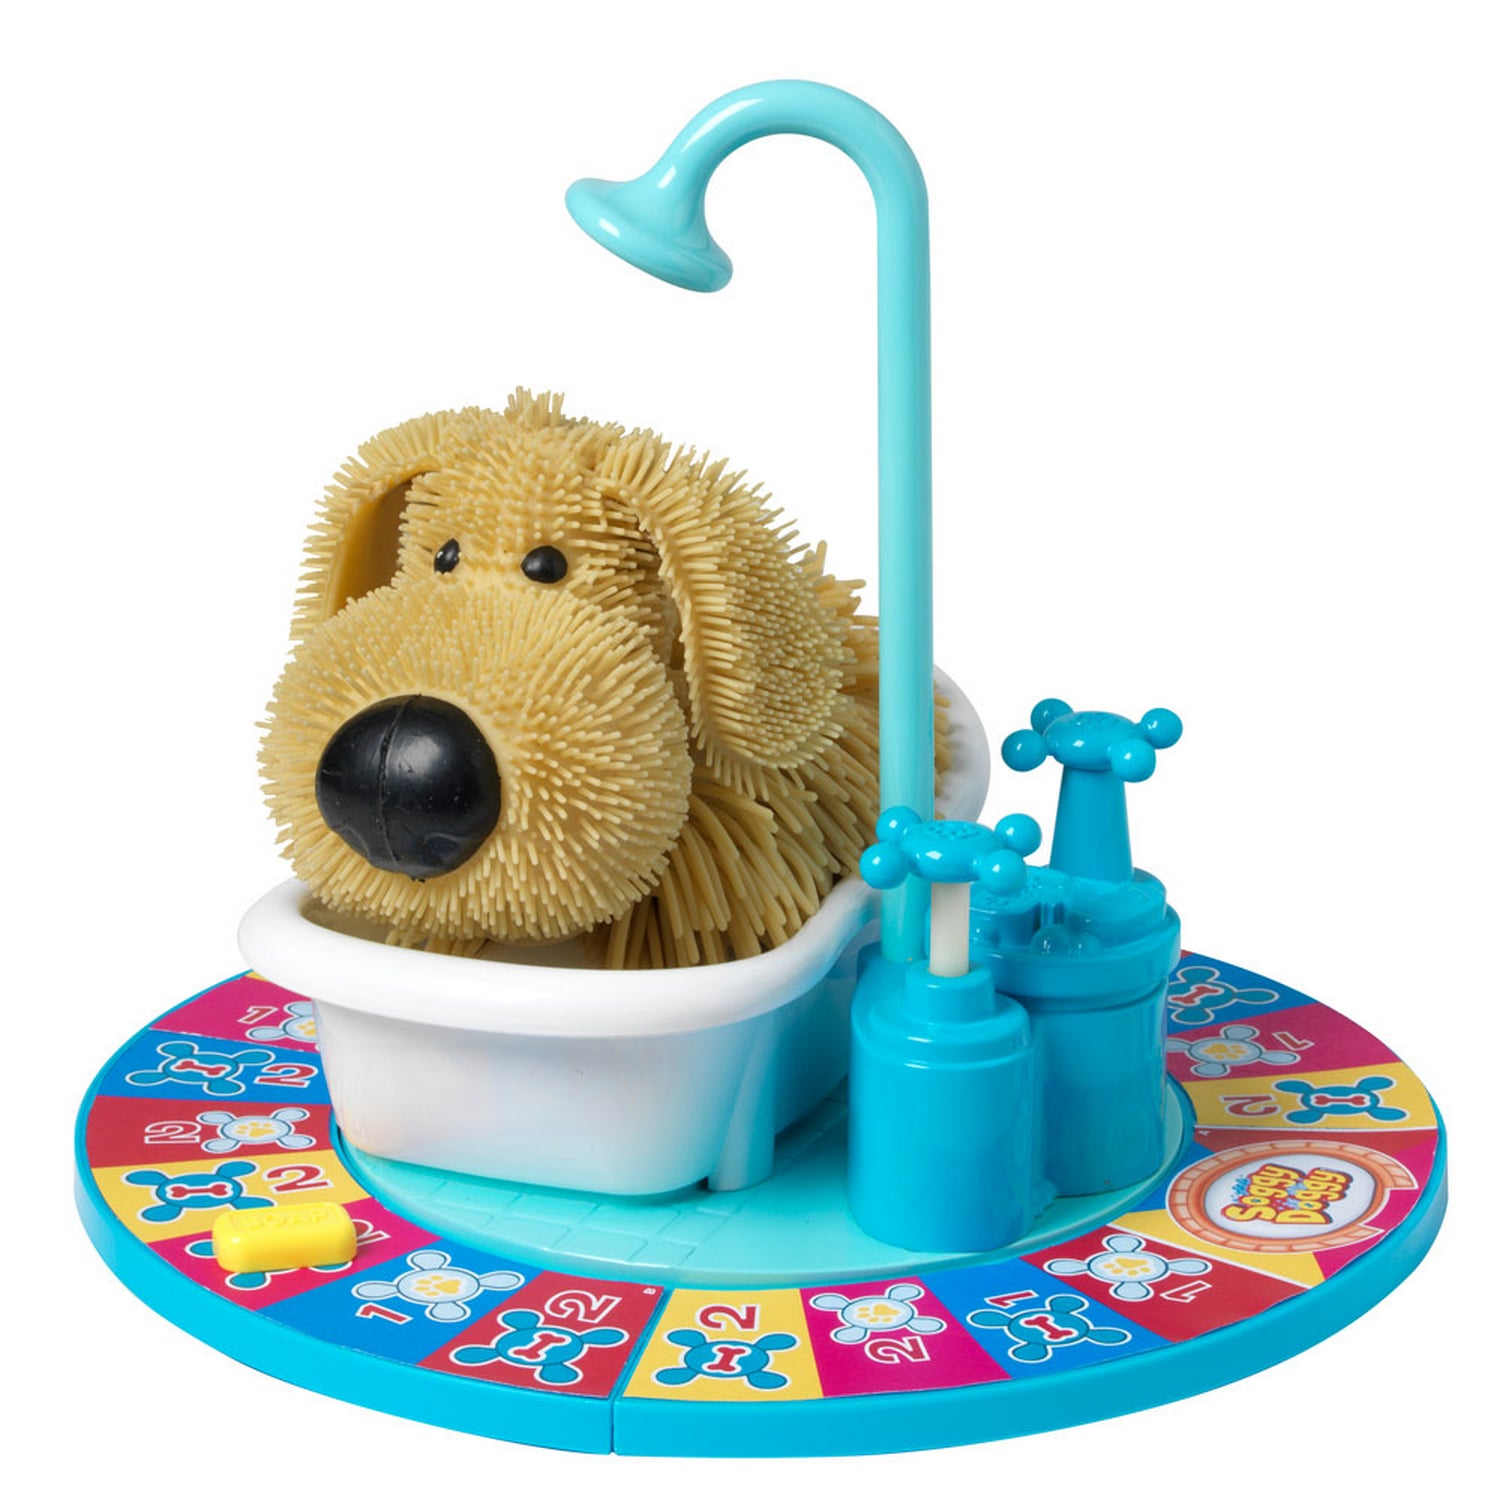 Soggy Doggy Family Fun Friends Childrens Modern Game